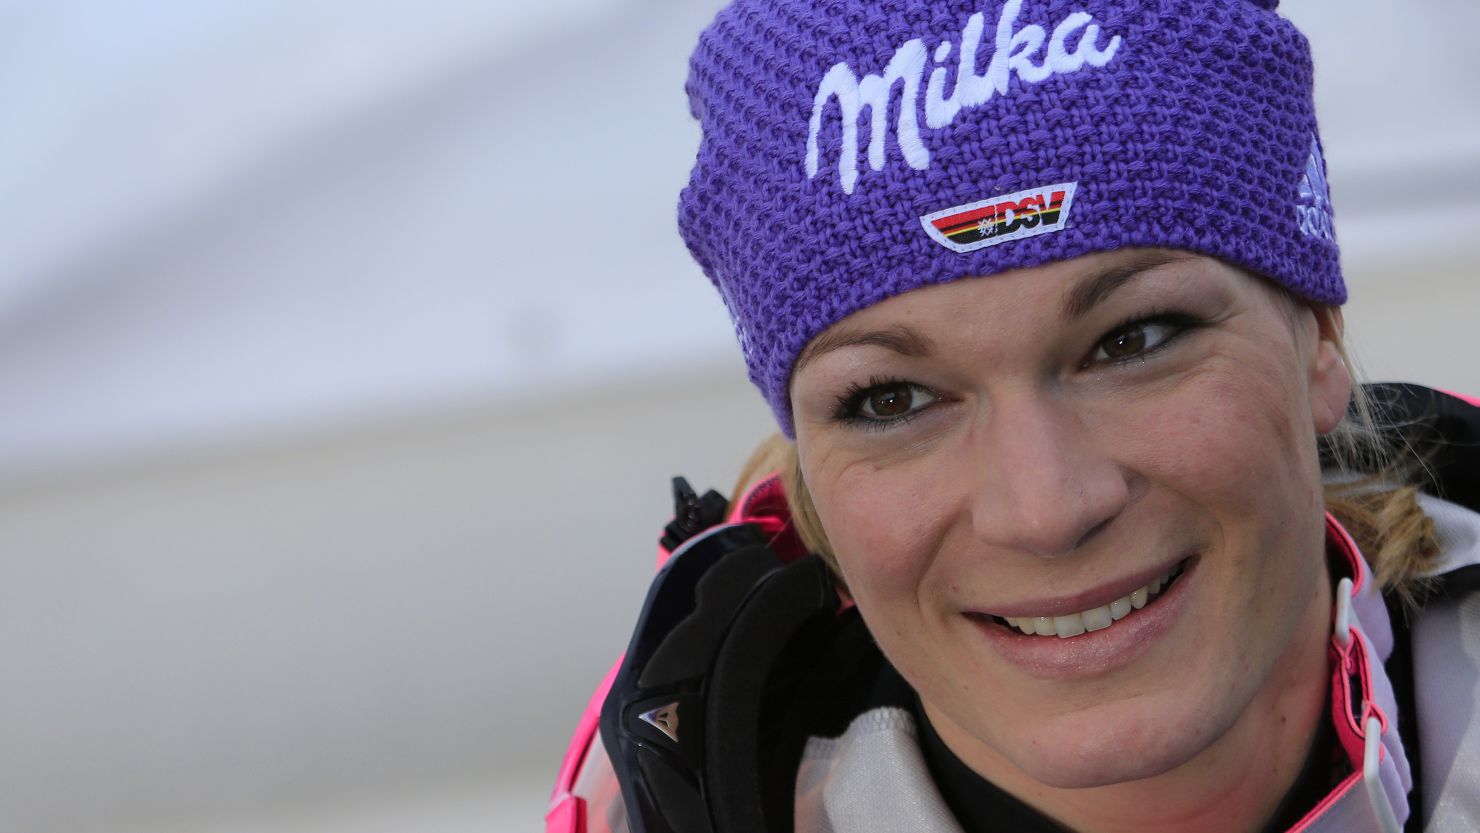 Germany's Maria Hoefl-Riesch won gold at at the women's super-combined event at the World Ski Championships in Austria. 